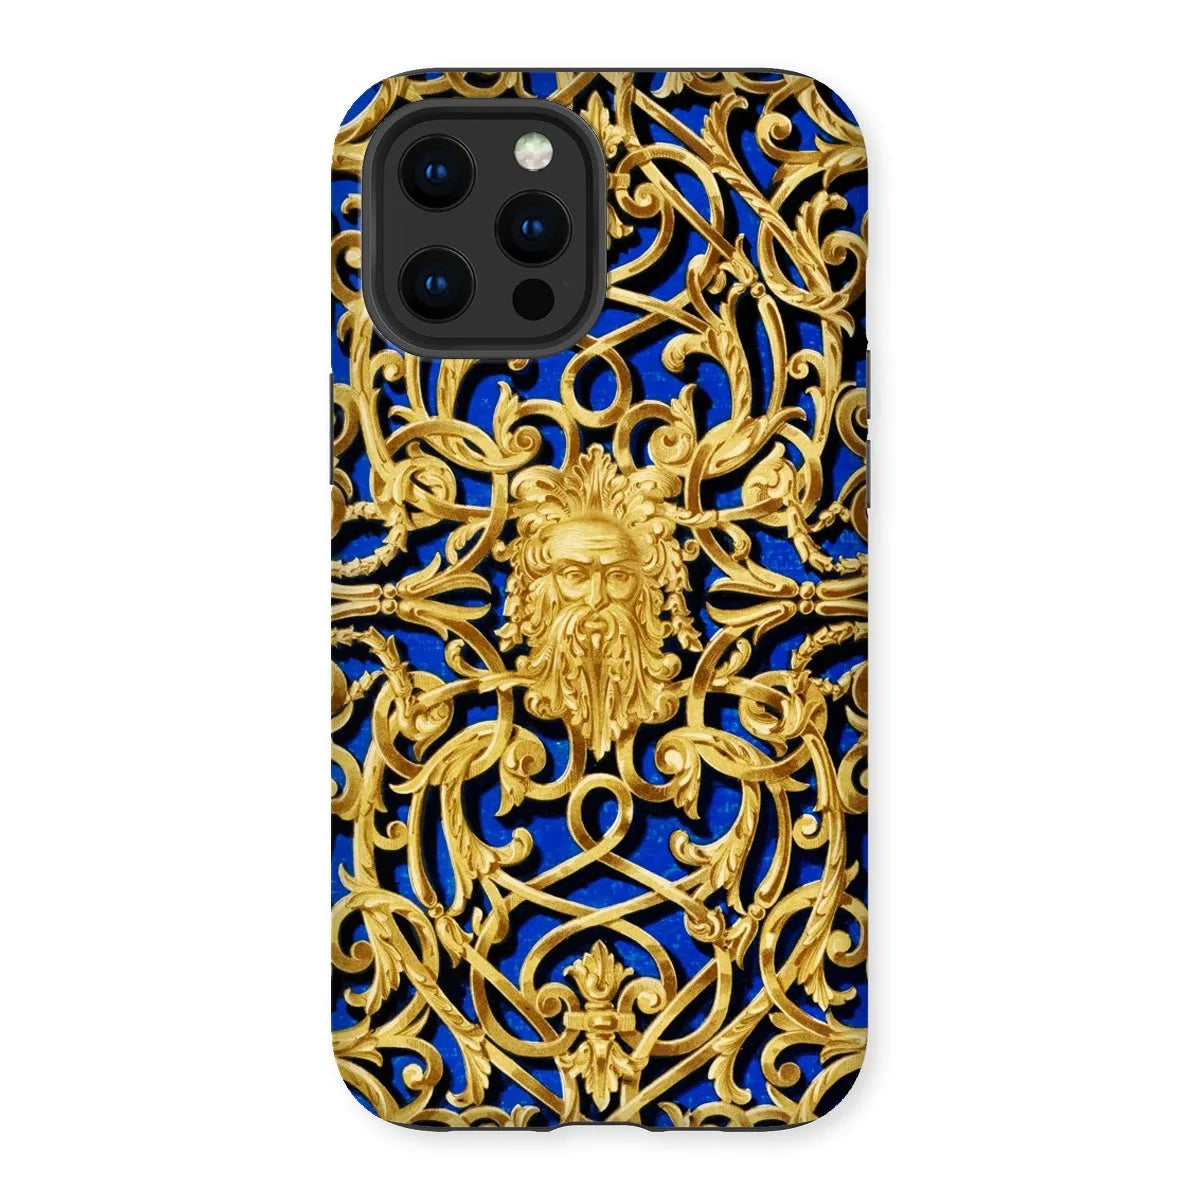 Gilded Gate Victorian Phone Case - Sir Matthew Digby Wyatt - Iphone 12 Pro Max / Matte - Mobile Phone Cases - Aesthetic